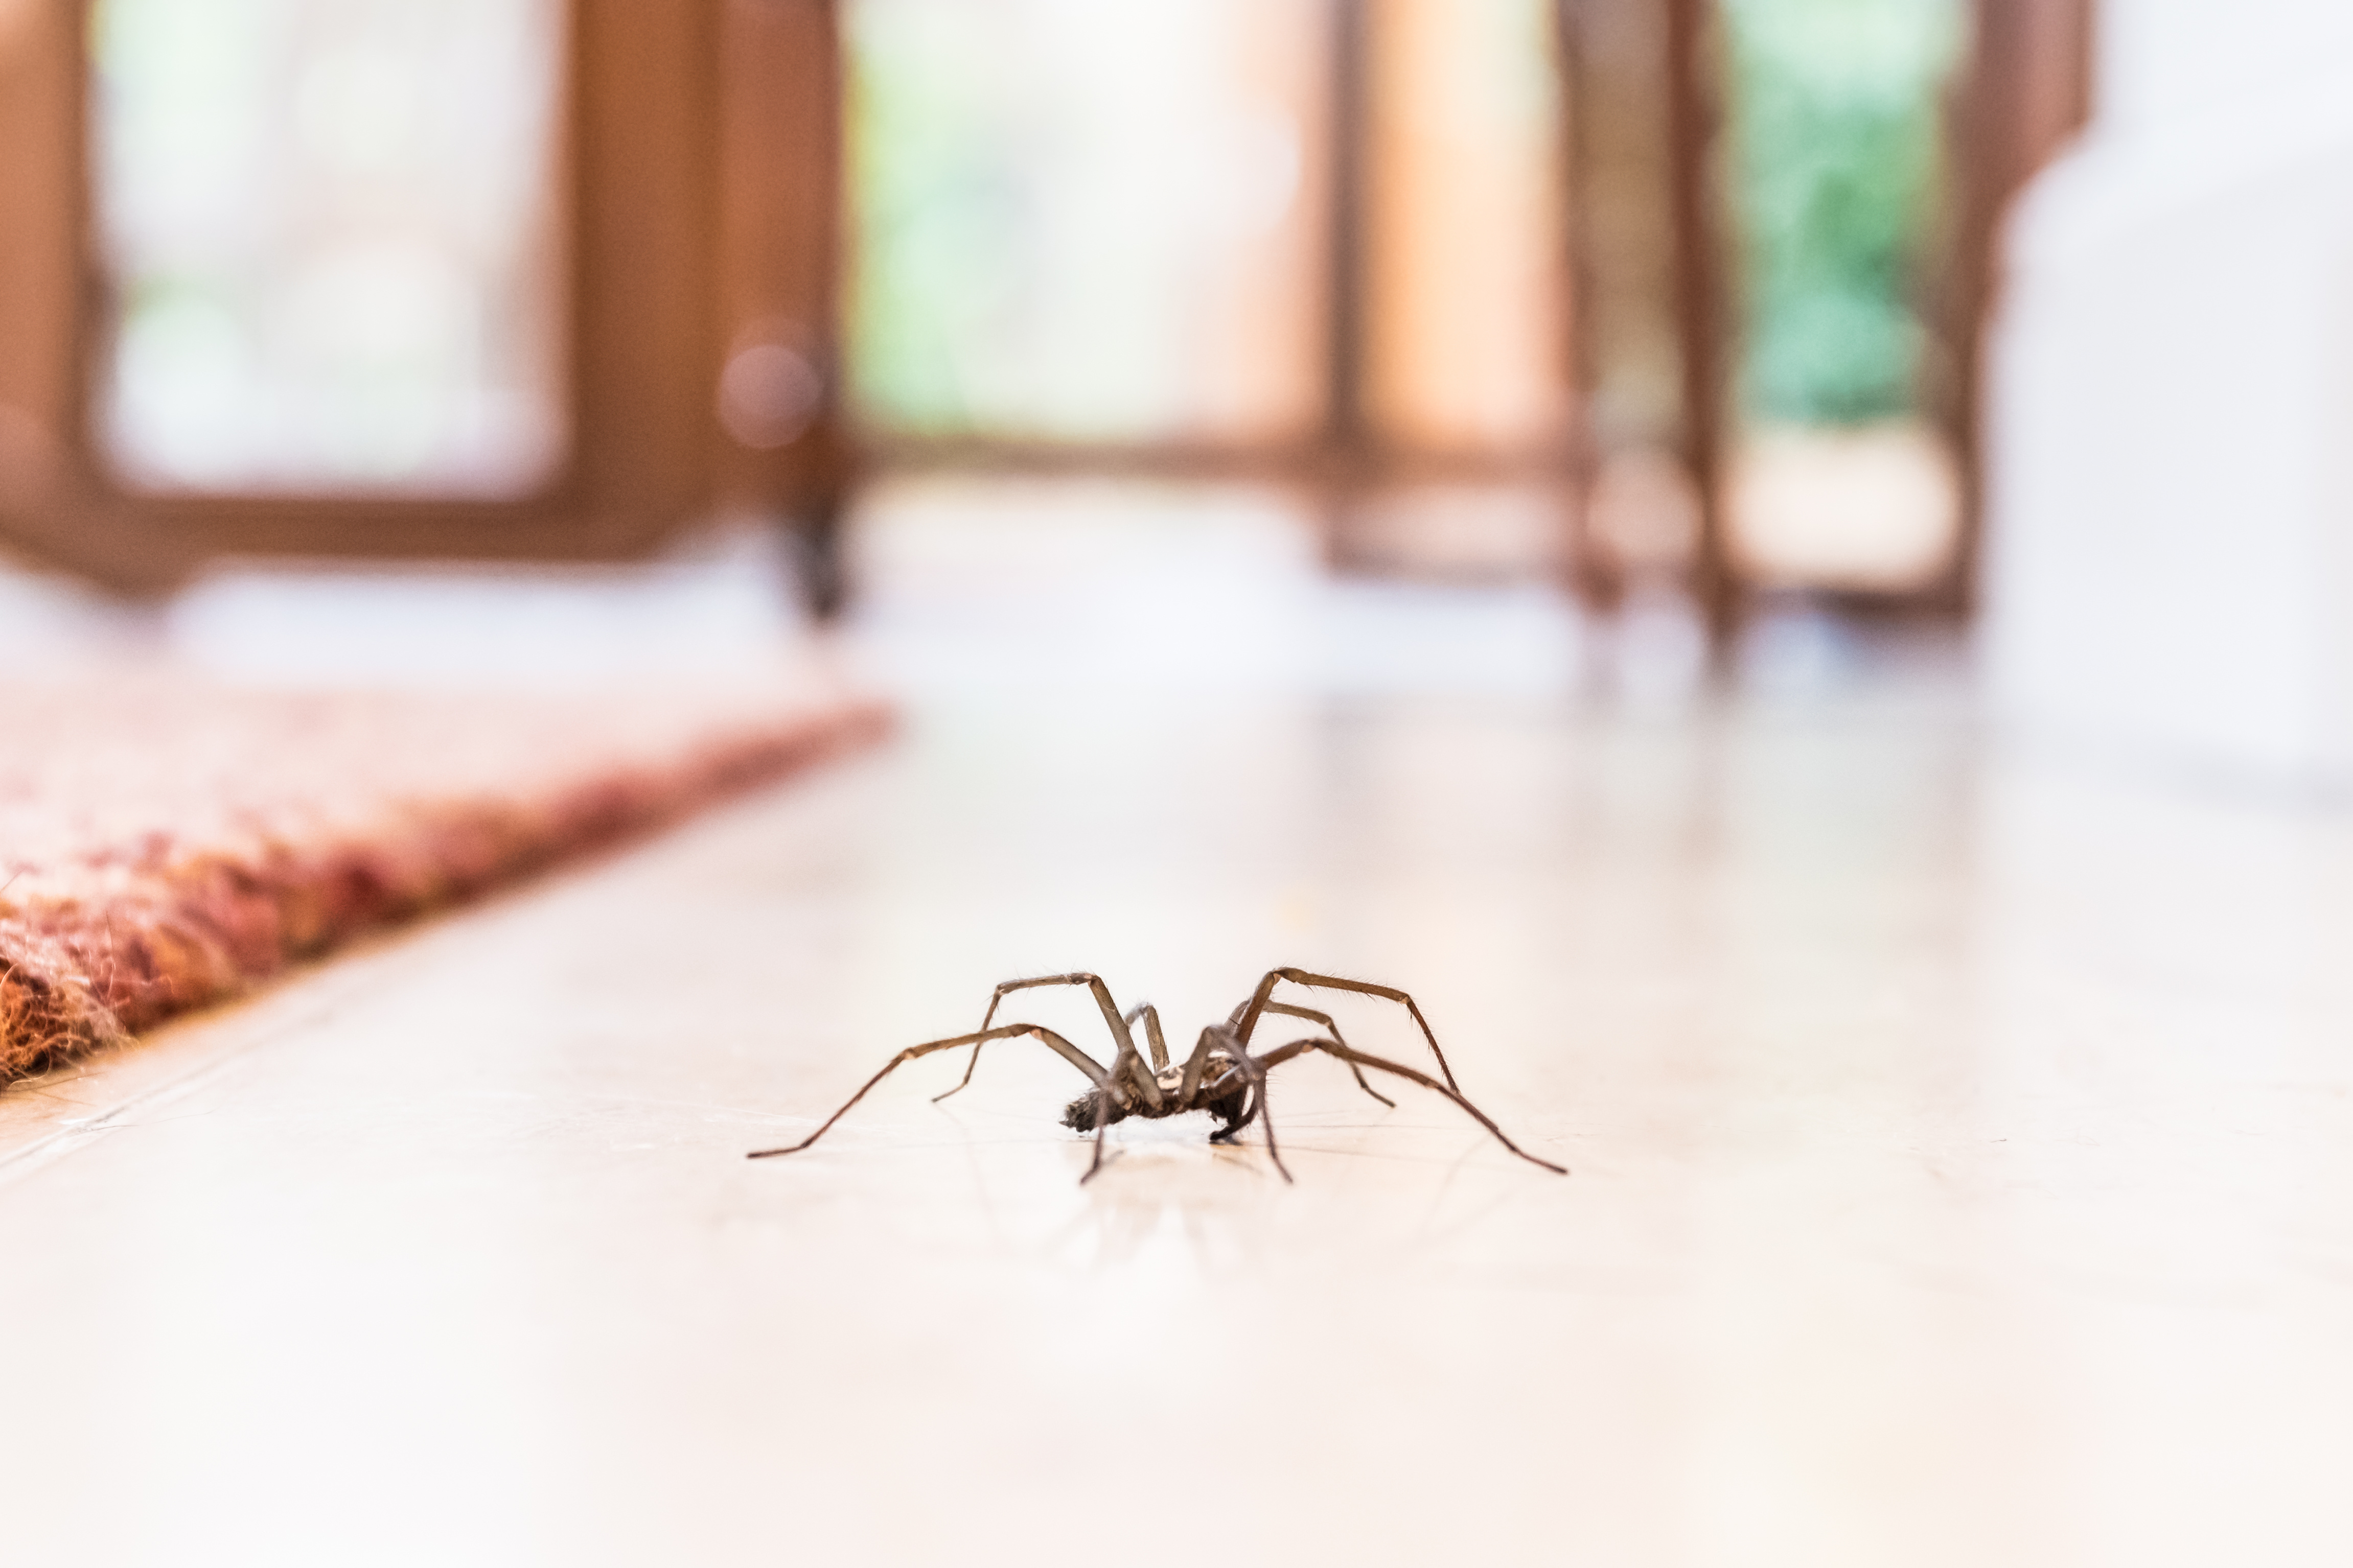 A spider scuttling across a hardwood floor - contact GGA Pest Management Hillsboro today for professional spider removal.